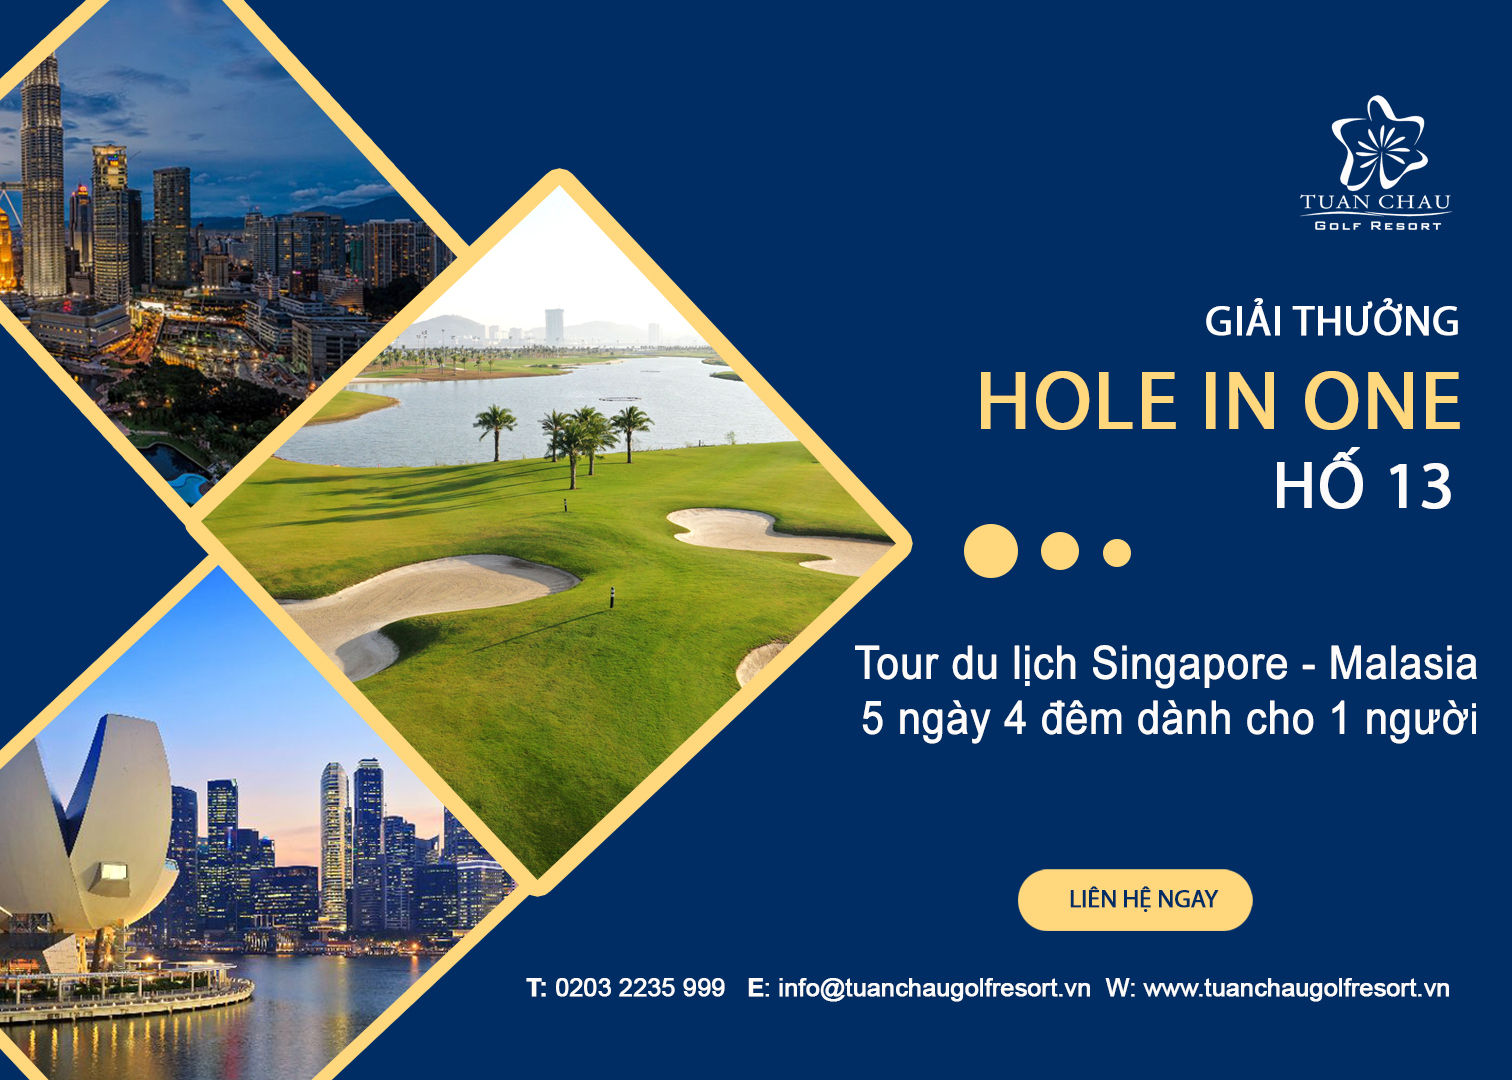 Giải thưởng Hole In One - Hố 13